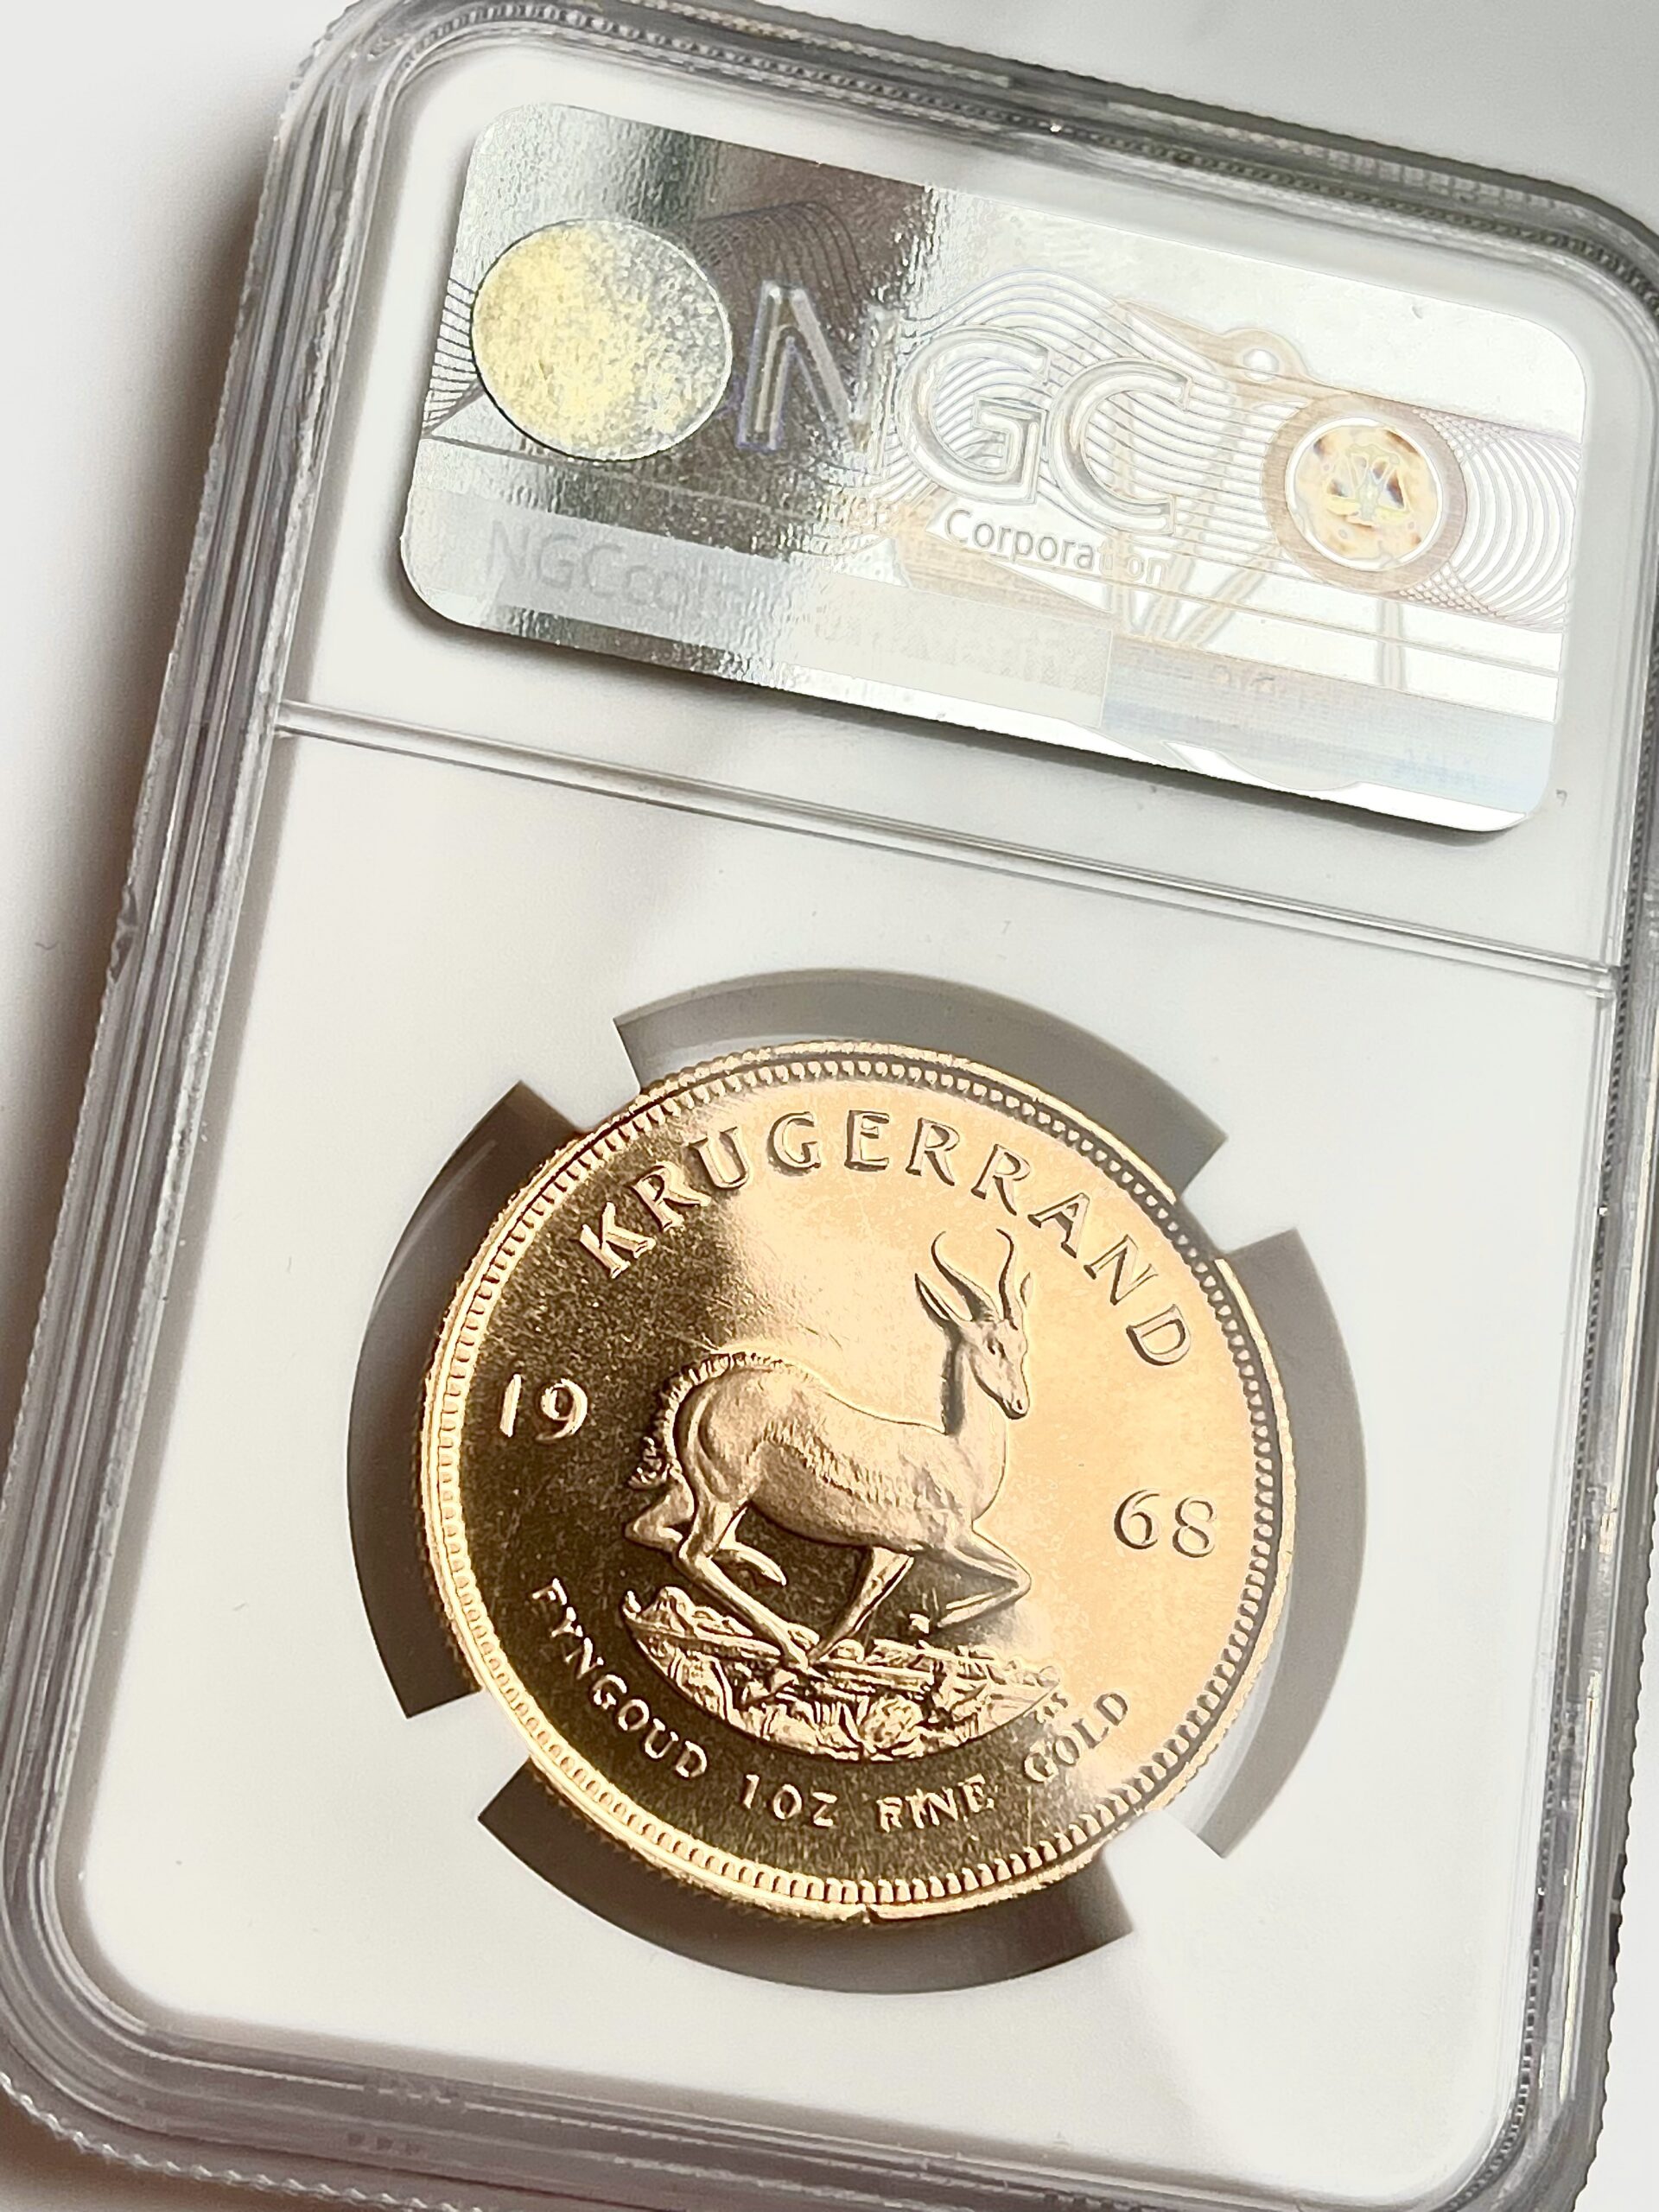 Krugerrand 1968 BSF both side frosted 1oz Proof Gold NGC PF65 UCAM